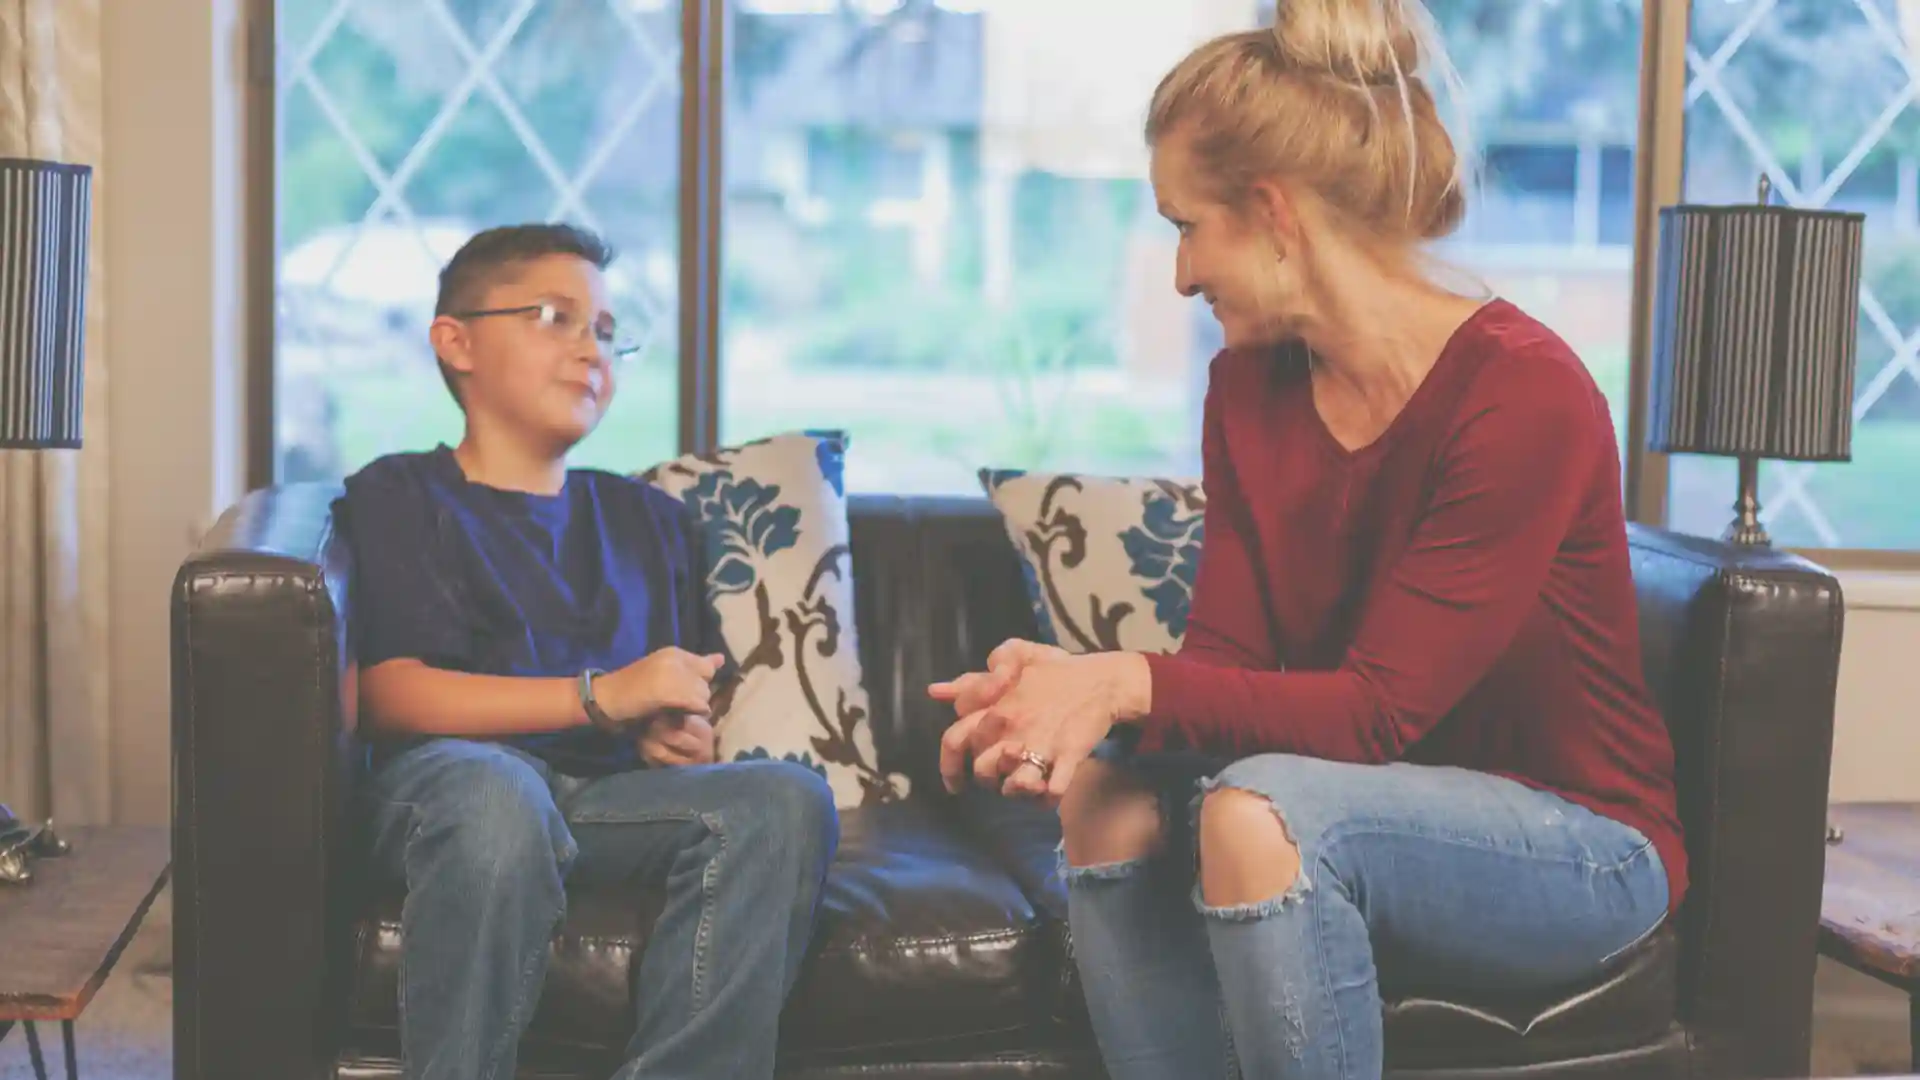 foster parent speaking to a foster child in texas while sitting on a couch